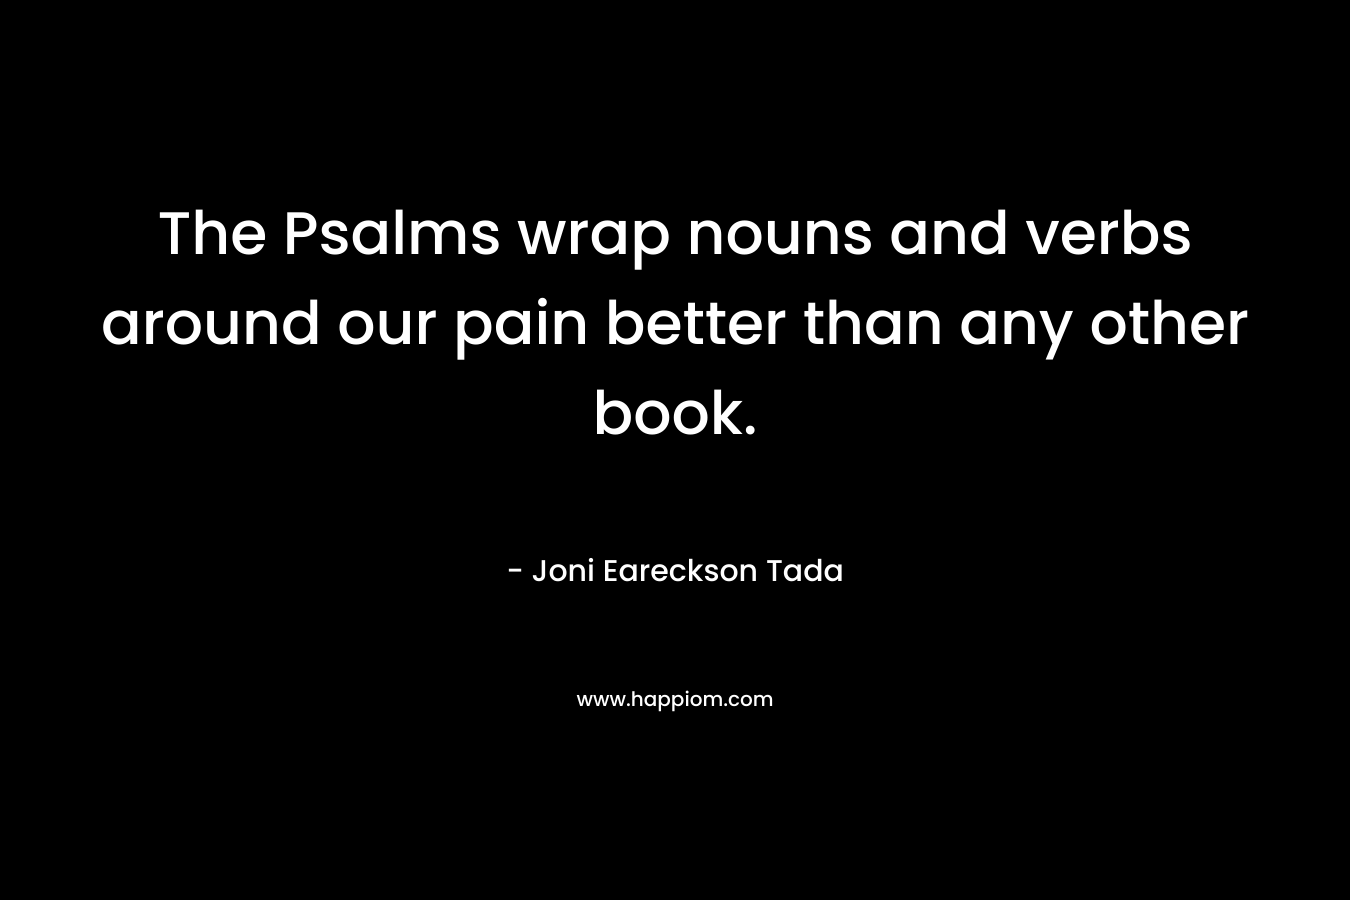 The Psalms wrap nouns and verbs around our pain better than any other book.